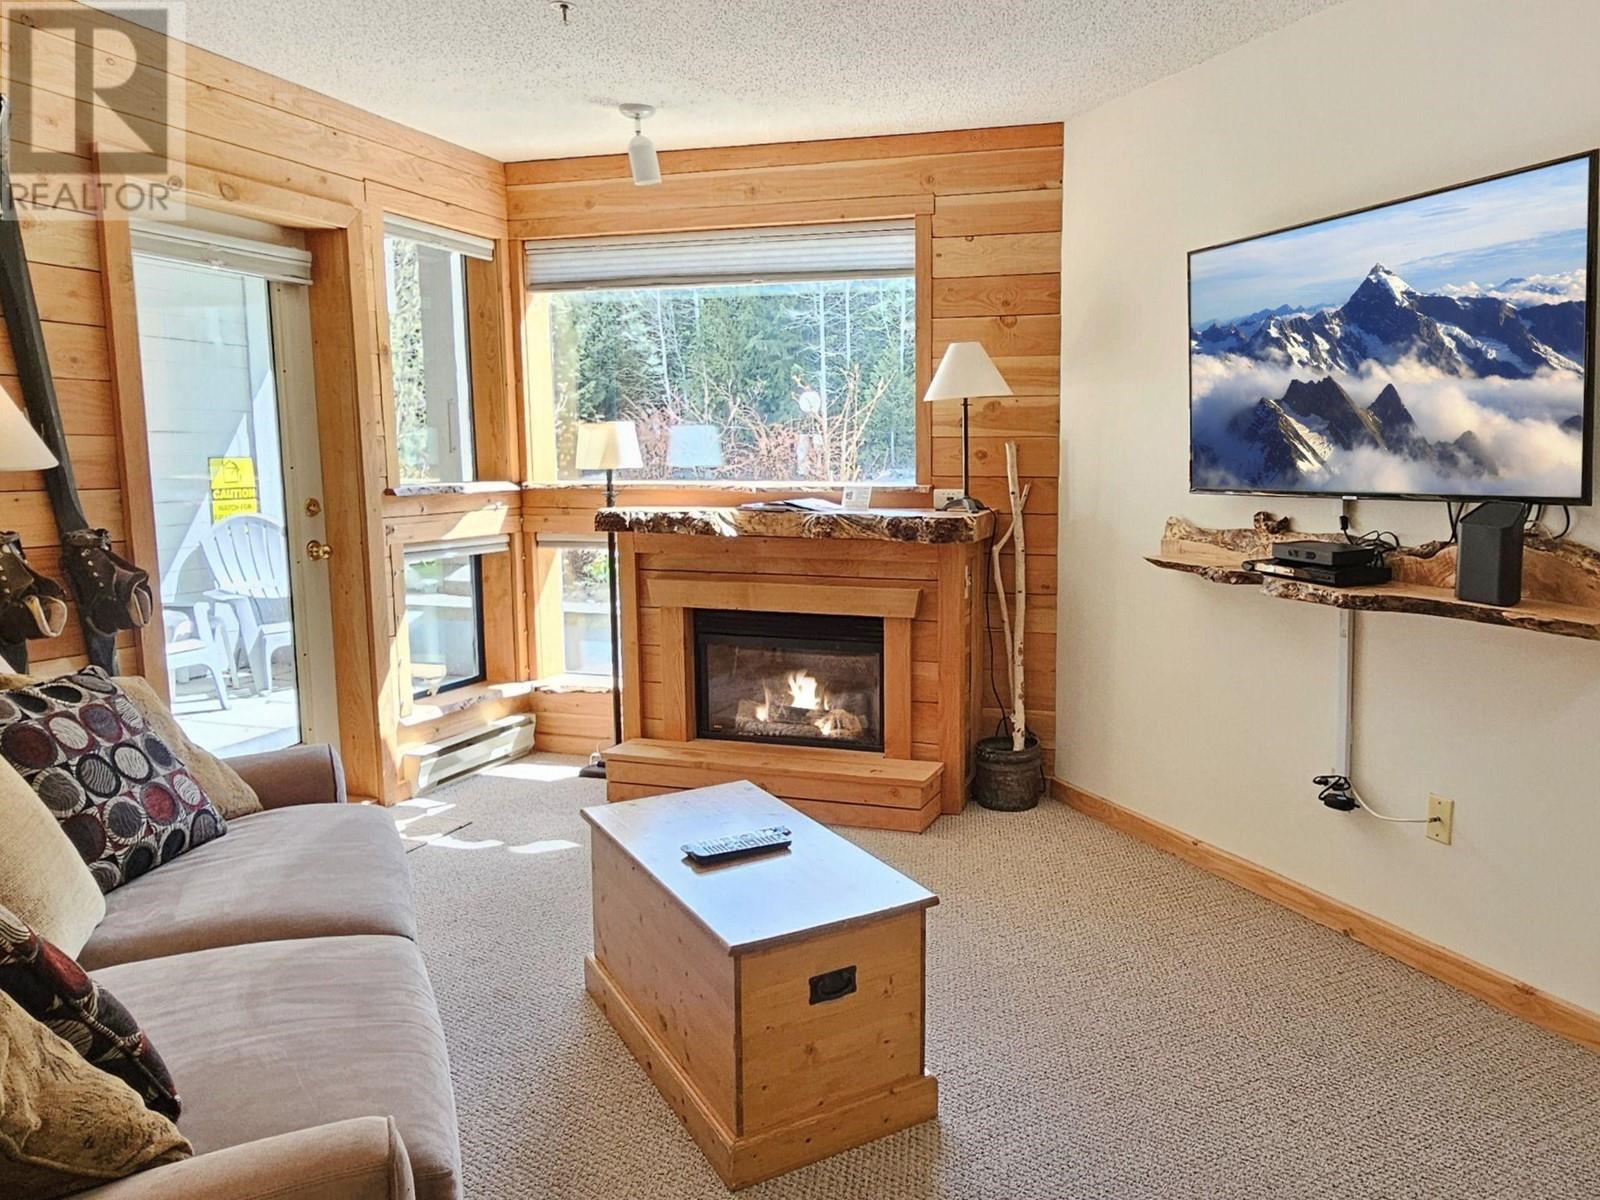 229 4905 SPEARHEAD PLACE, whistler, British Columbia